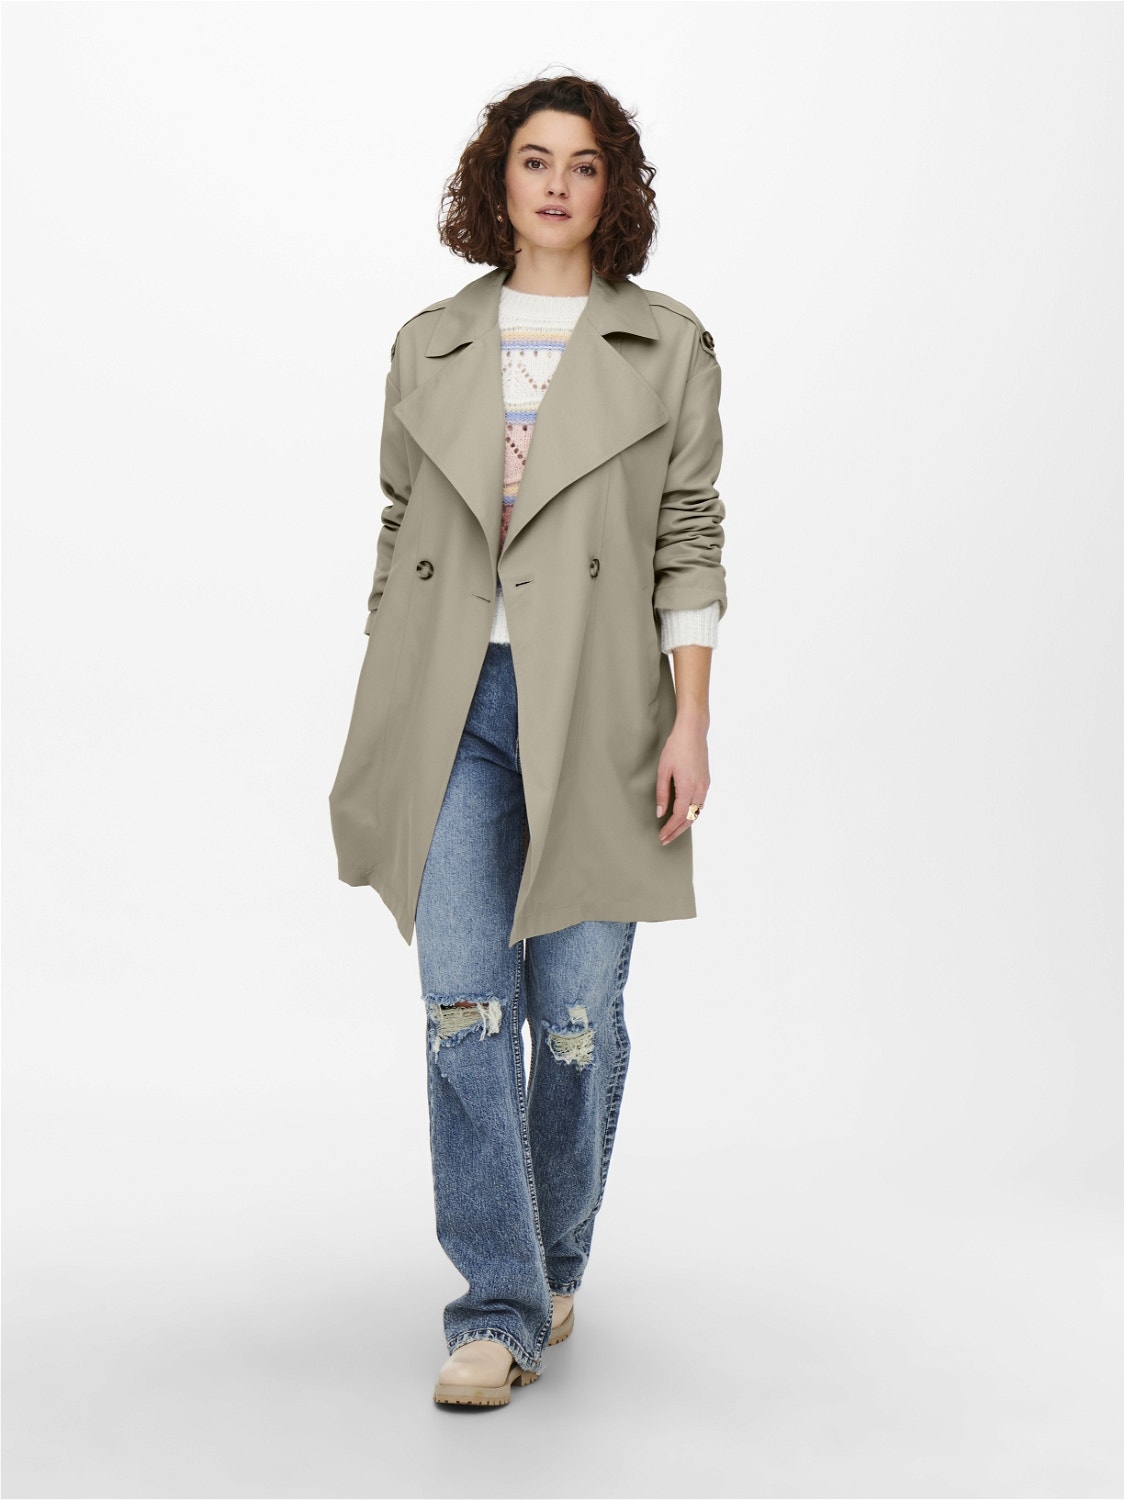 ONLY Manteaux Capuche -Trench Coat - 15242289